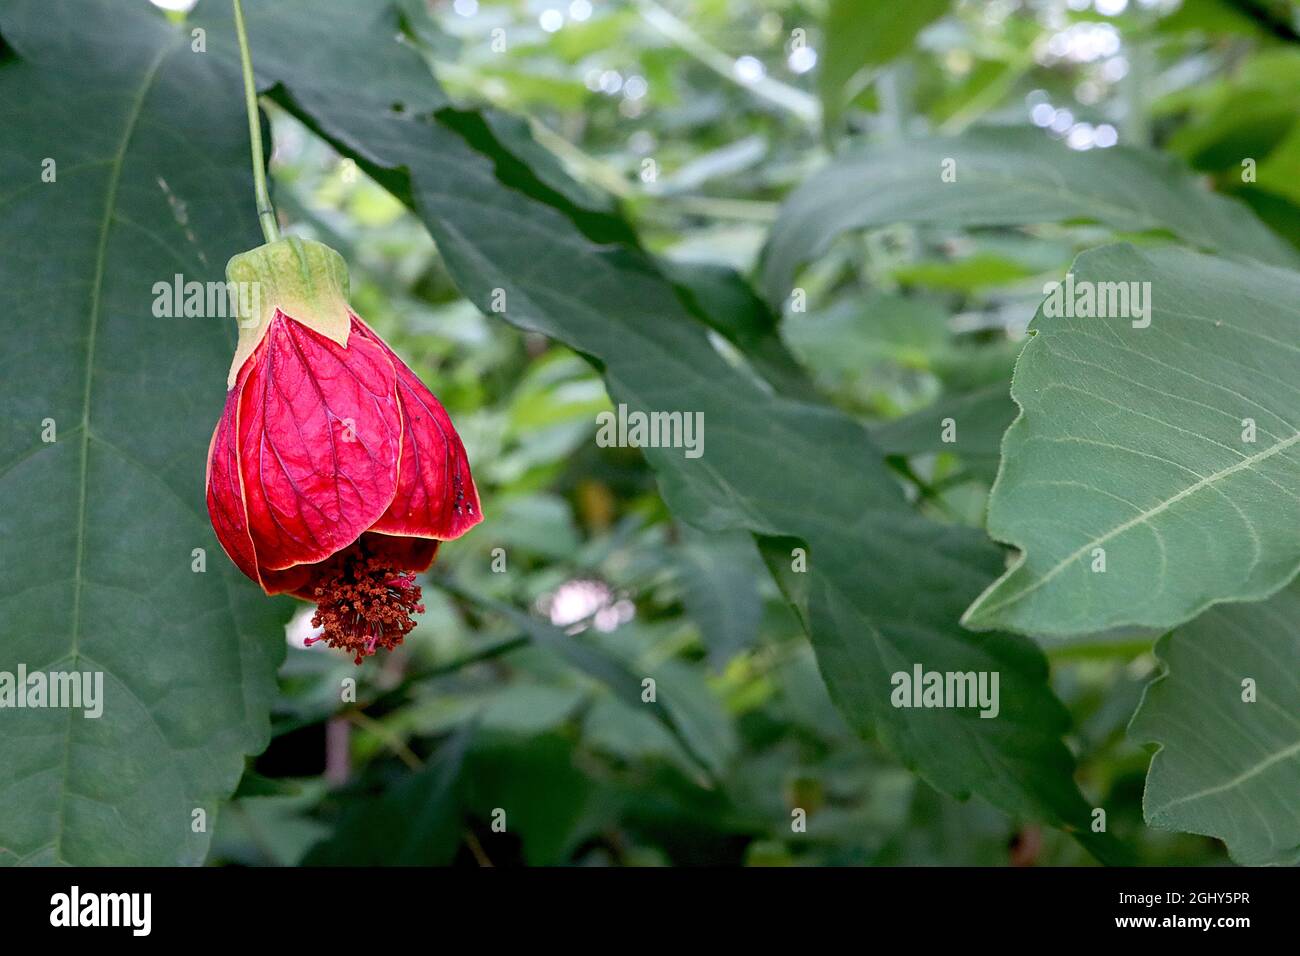 Callianthe picta Abutilon pictum – red bell-shaped flowers with maroon veins and light green cap-like sepals,  August, England, UK Stock Photo